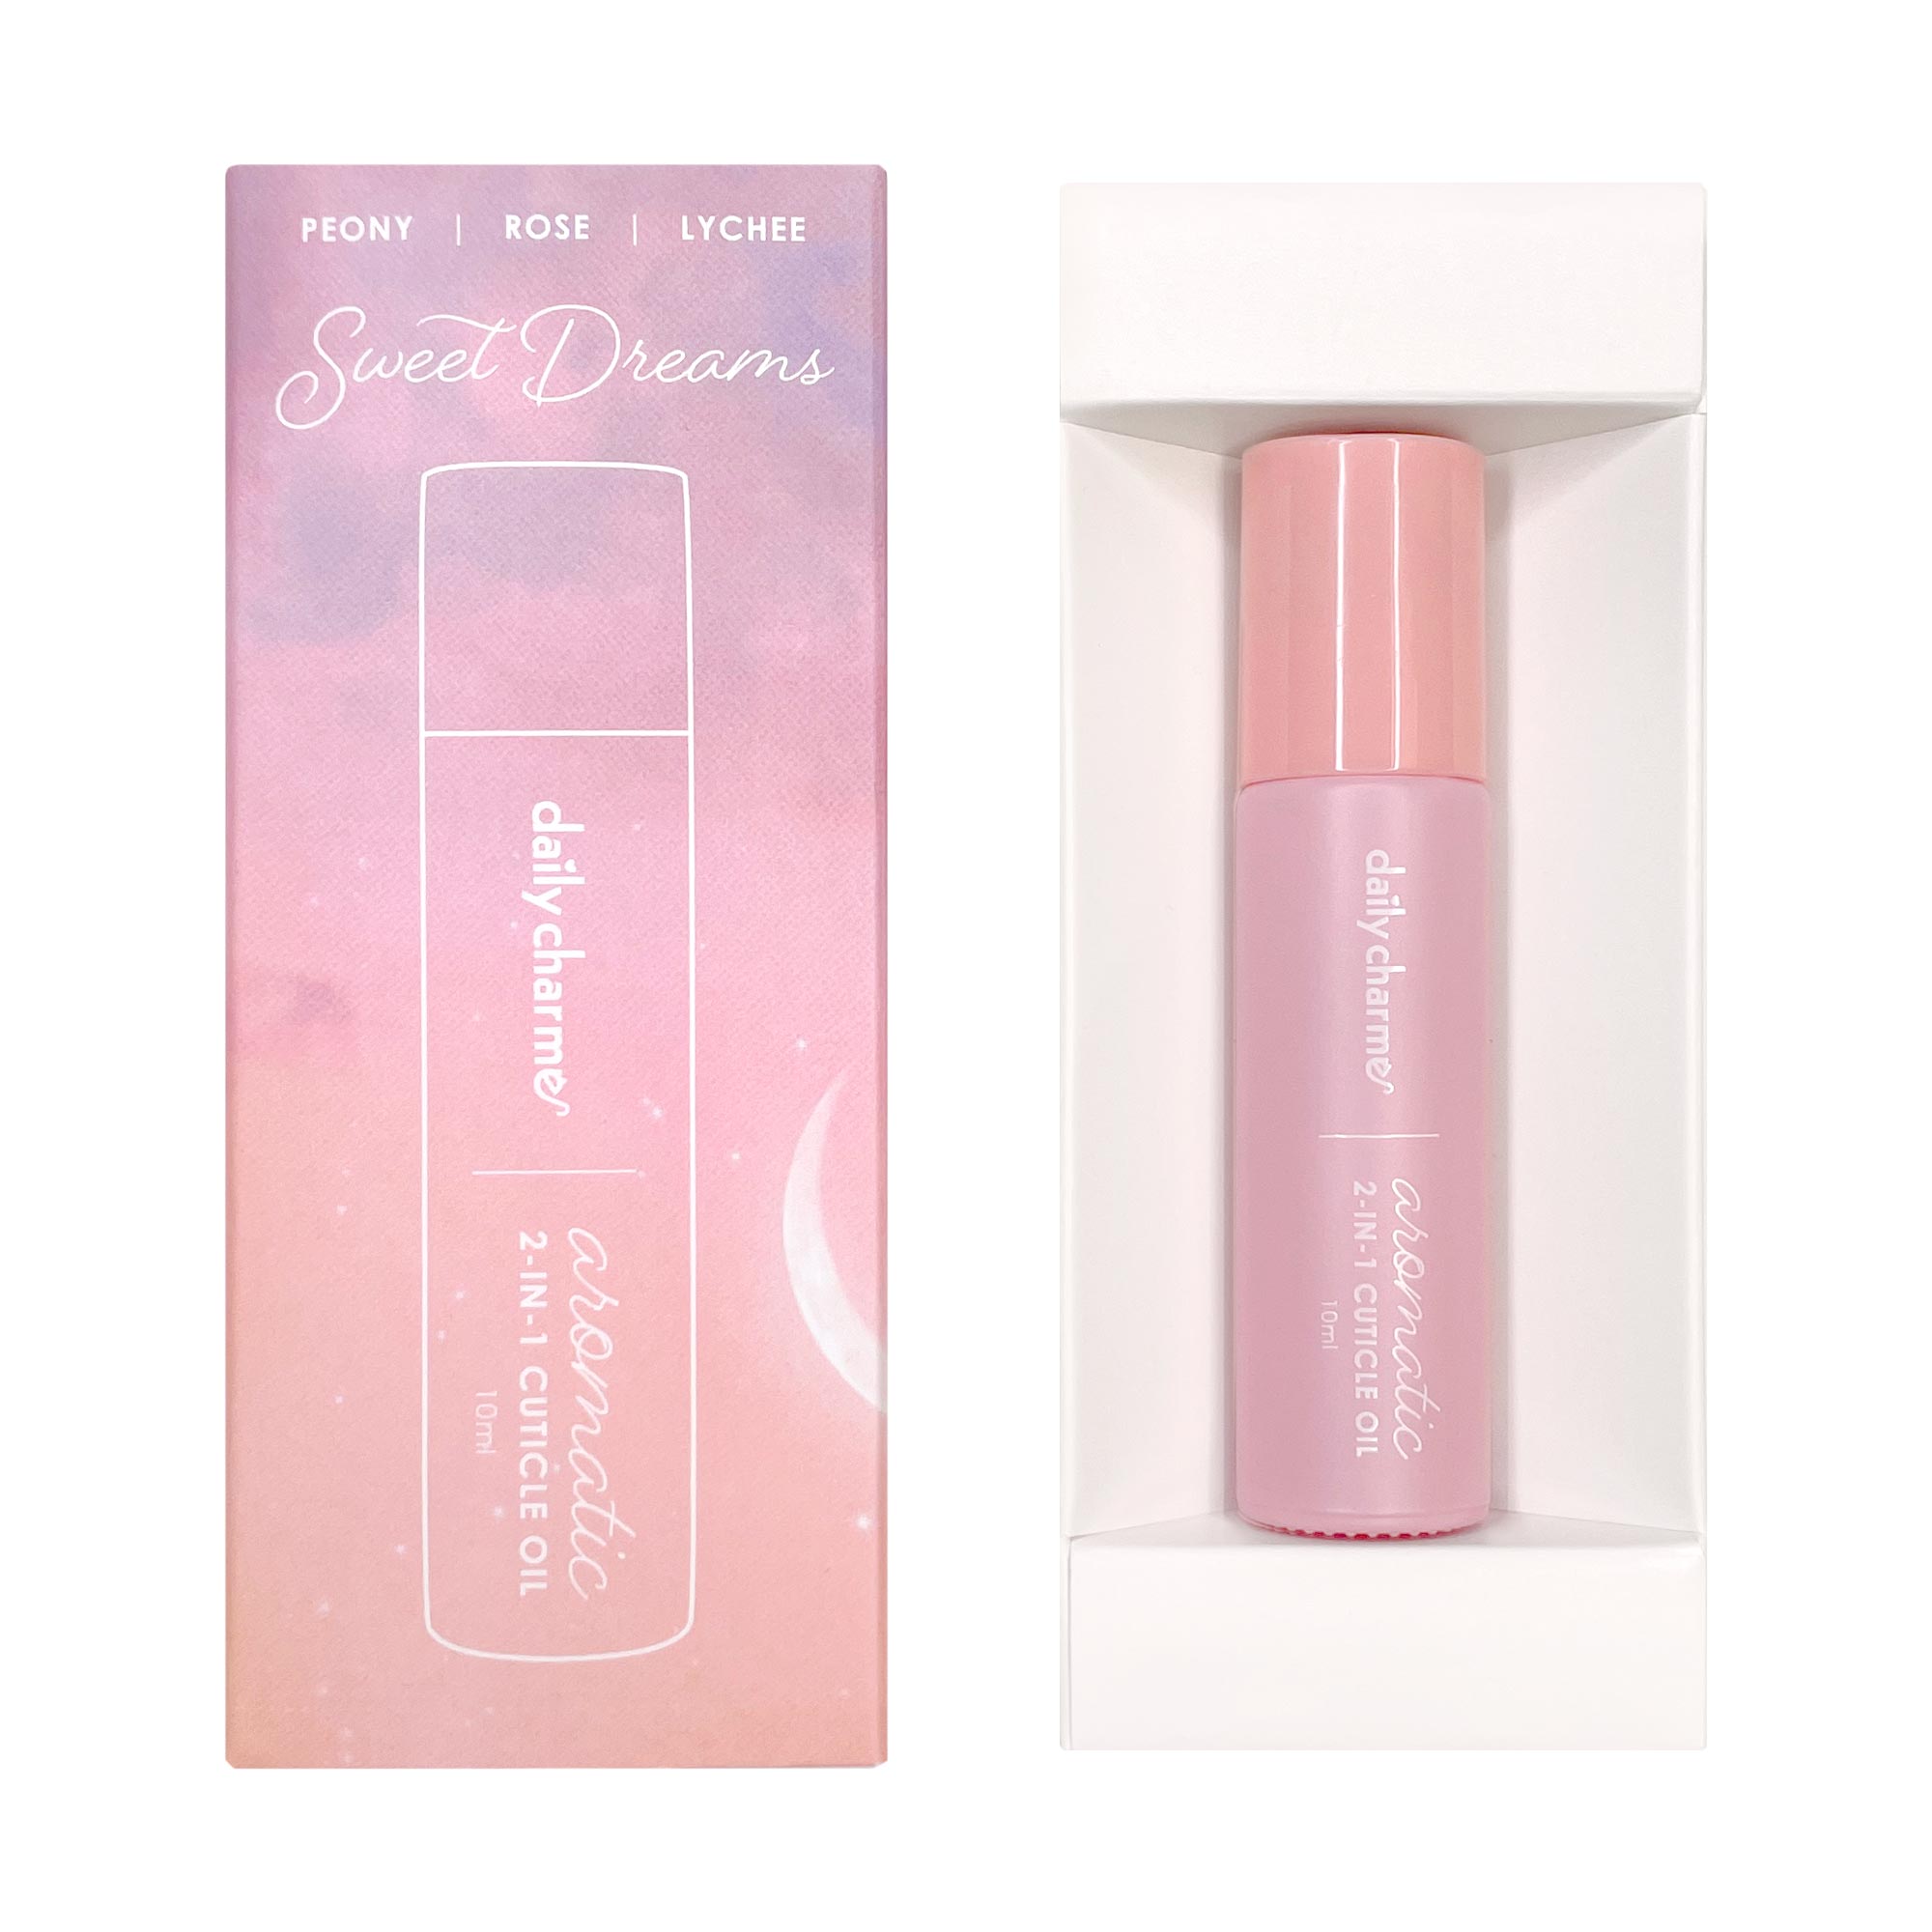 Daily Charme Aromatic 2-in-1 Cuticle Oil Roller / Sweet Dreams Rose Peony Lychee Perfume